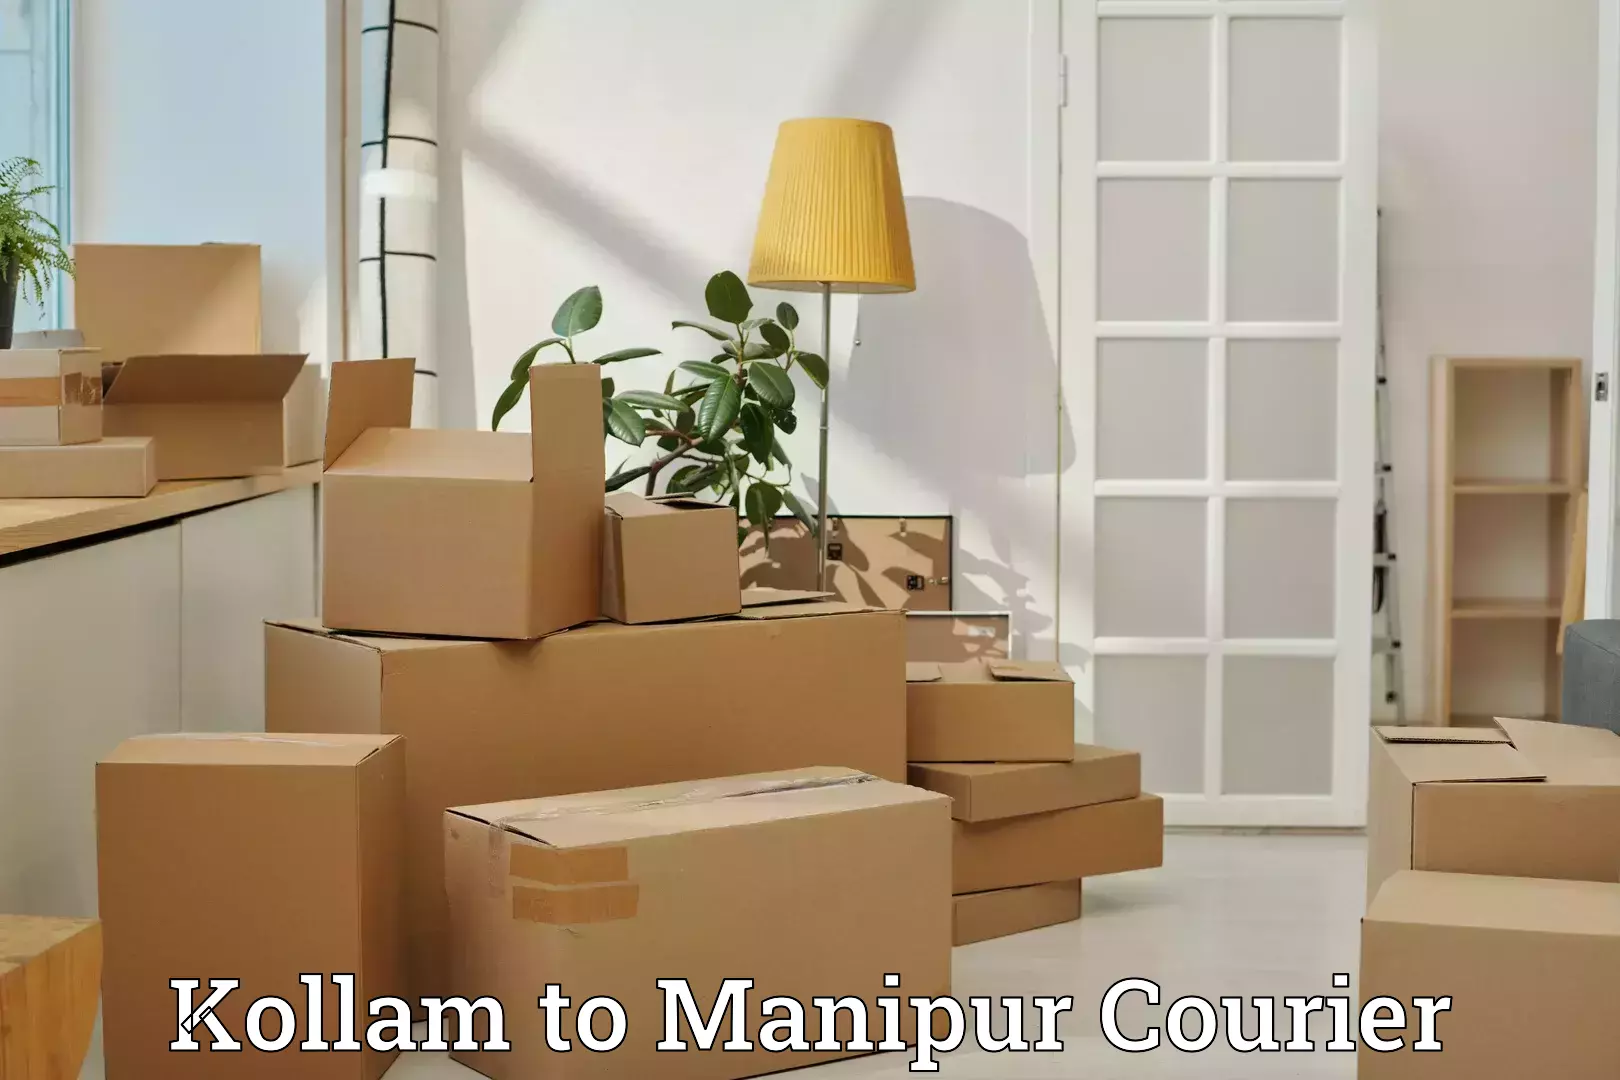 Luggage shipping specialists Kollam to Kanti